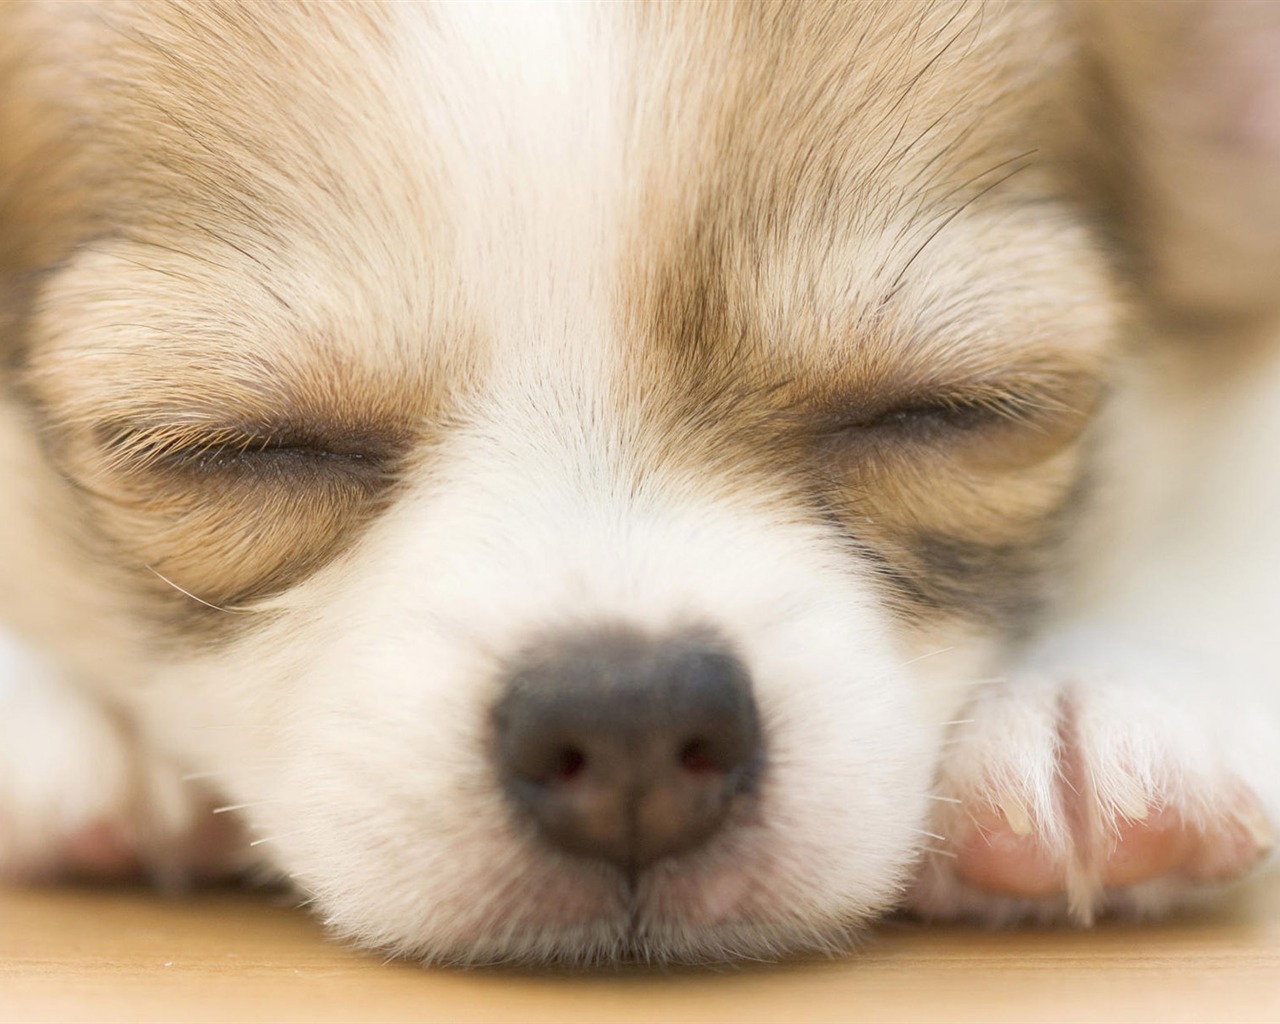 Puppy Photo HD wallpapers (9) #9 - 1280x1024